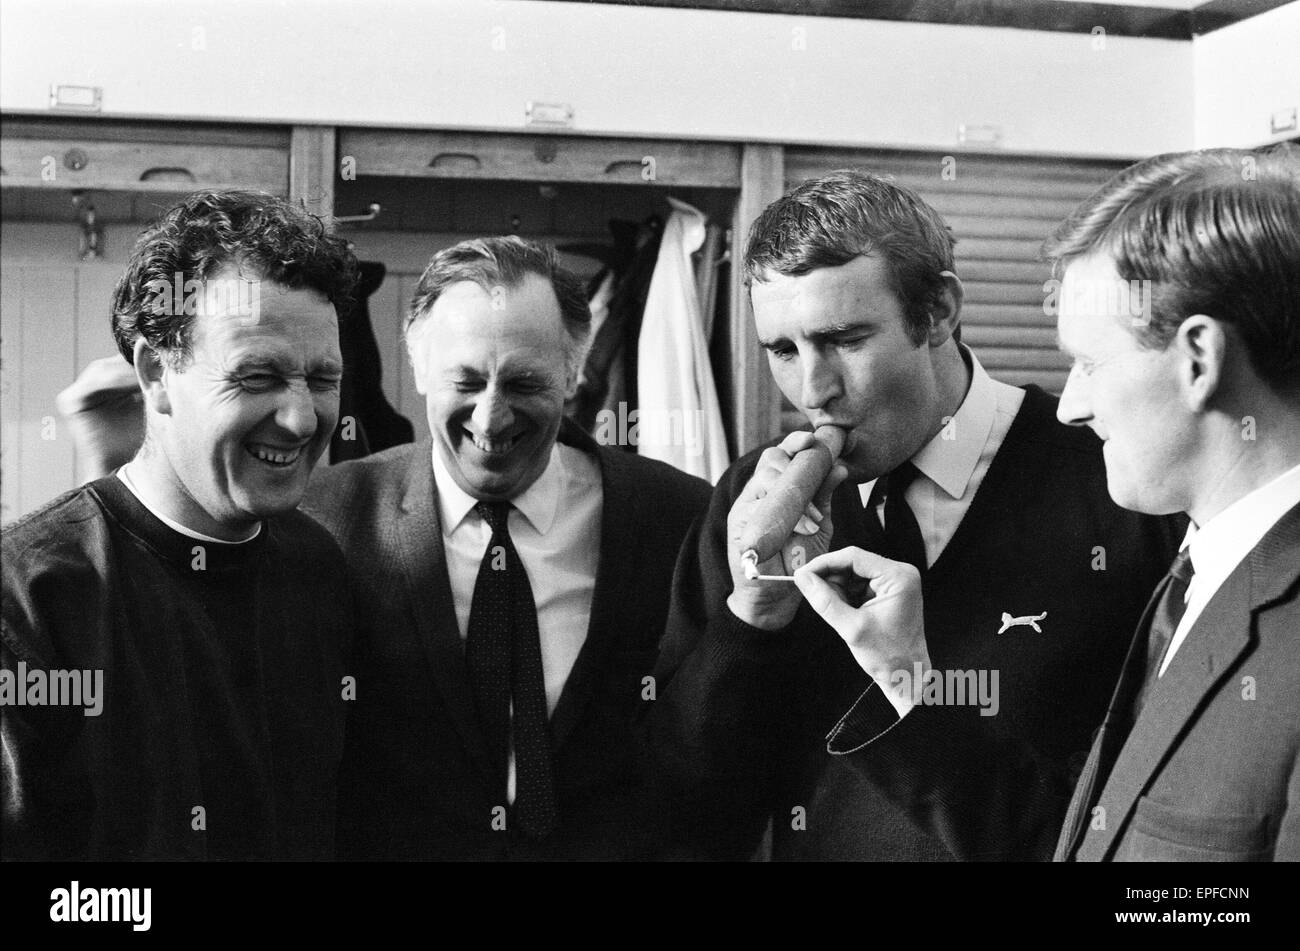 Newcastle Utd v Manchester City 11th May 1968  League Division One Match at St James Park Joe Mercer and Malcolm Allison Celebrate win Final Score Newcastle 3 Manchester City 4 Stock Photo